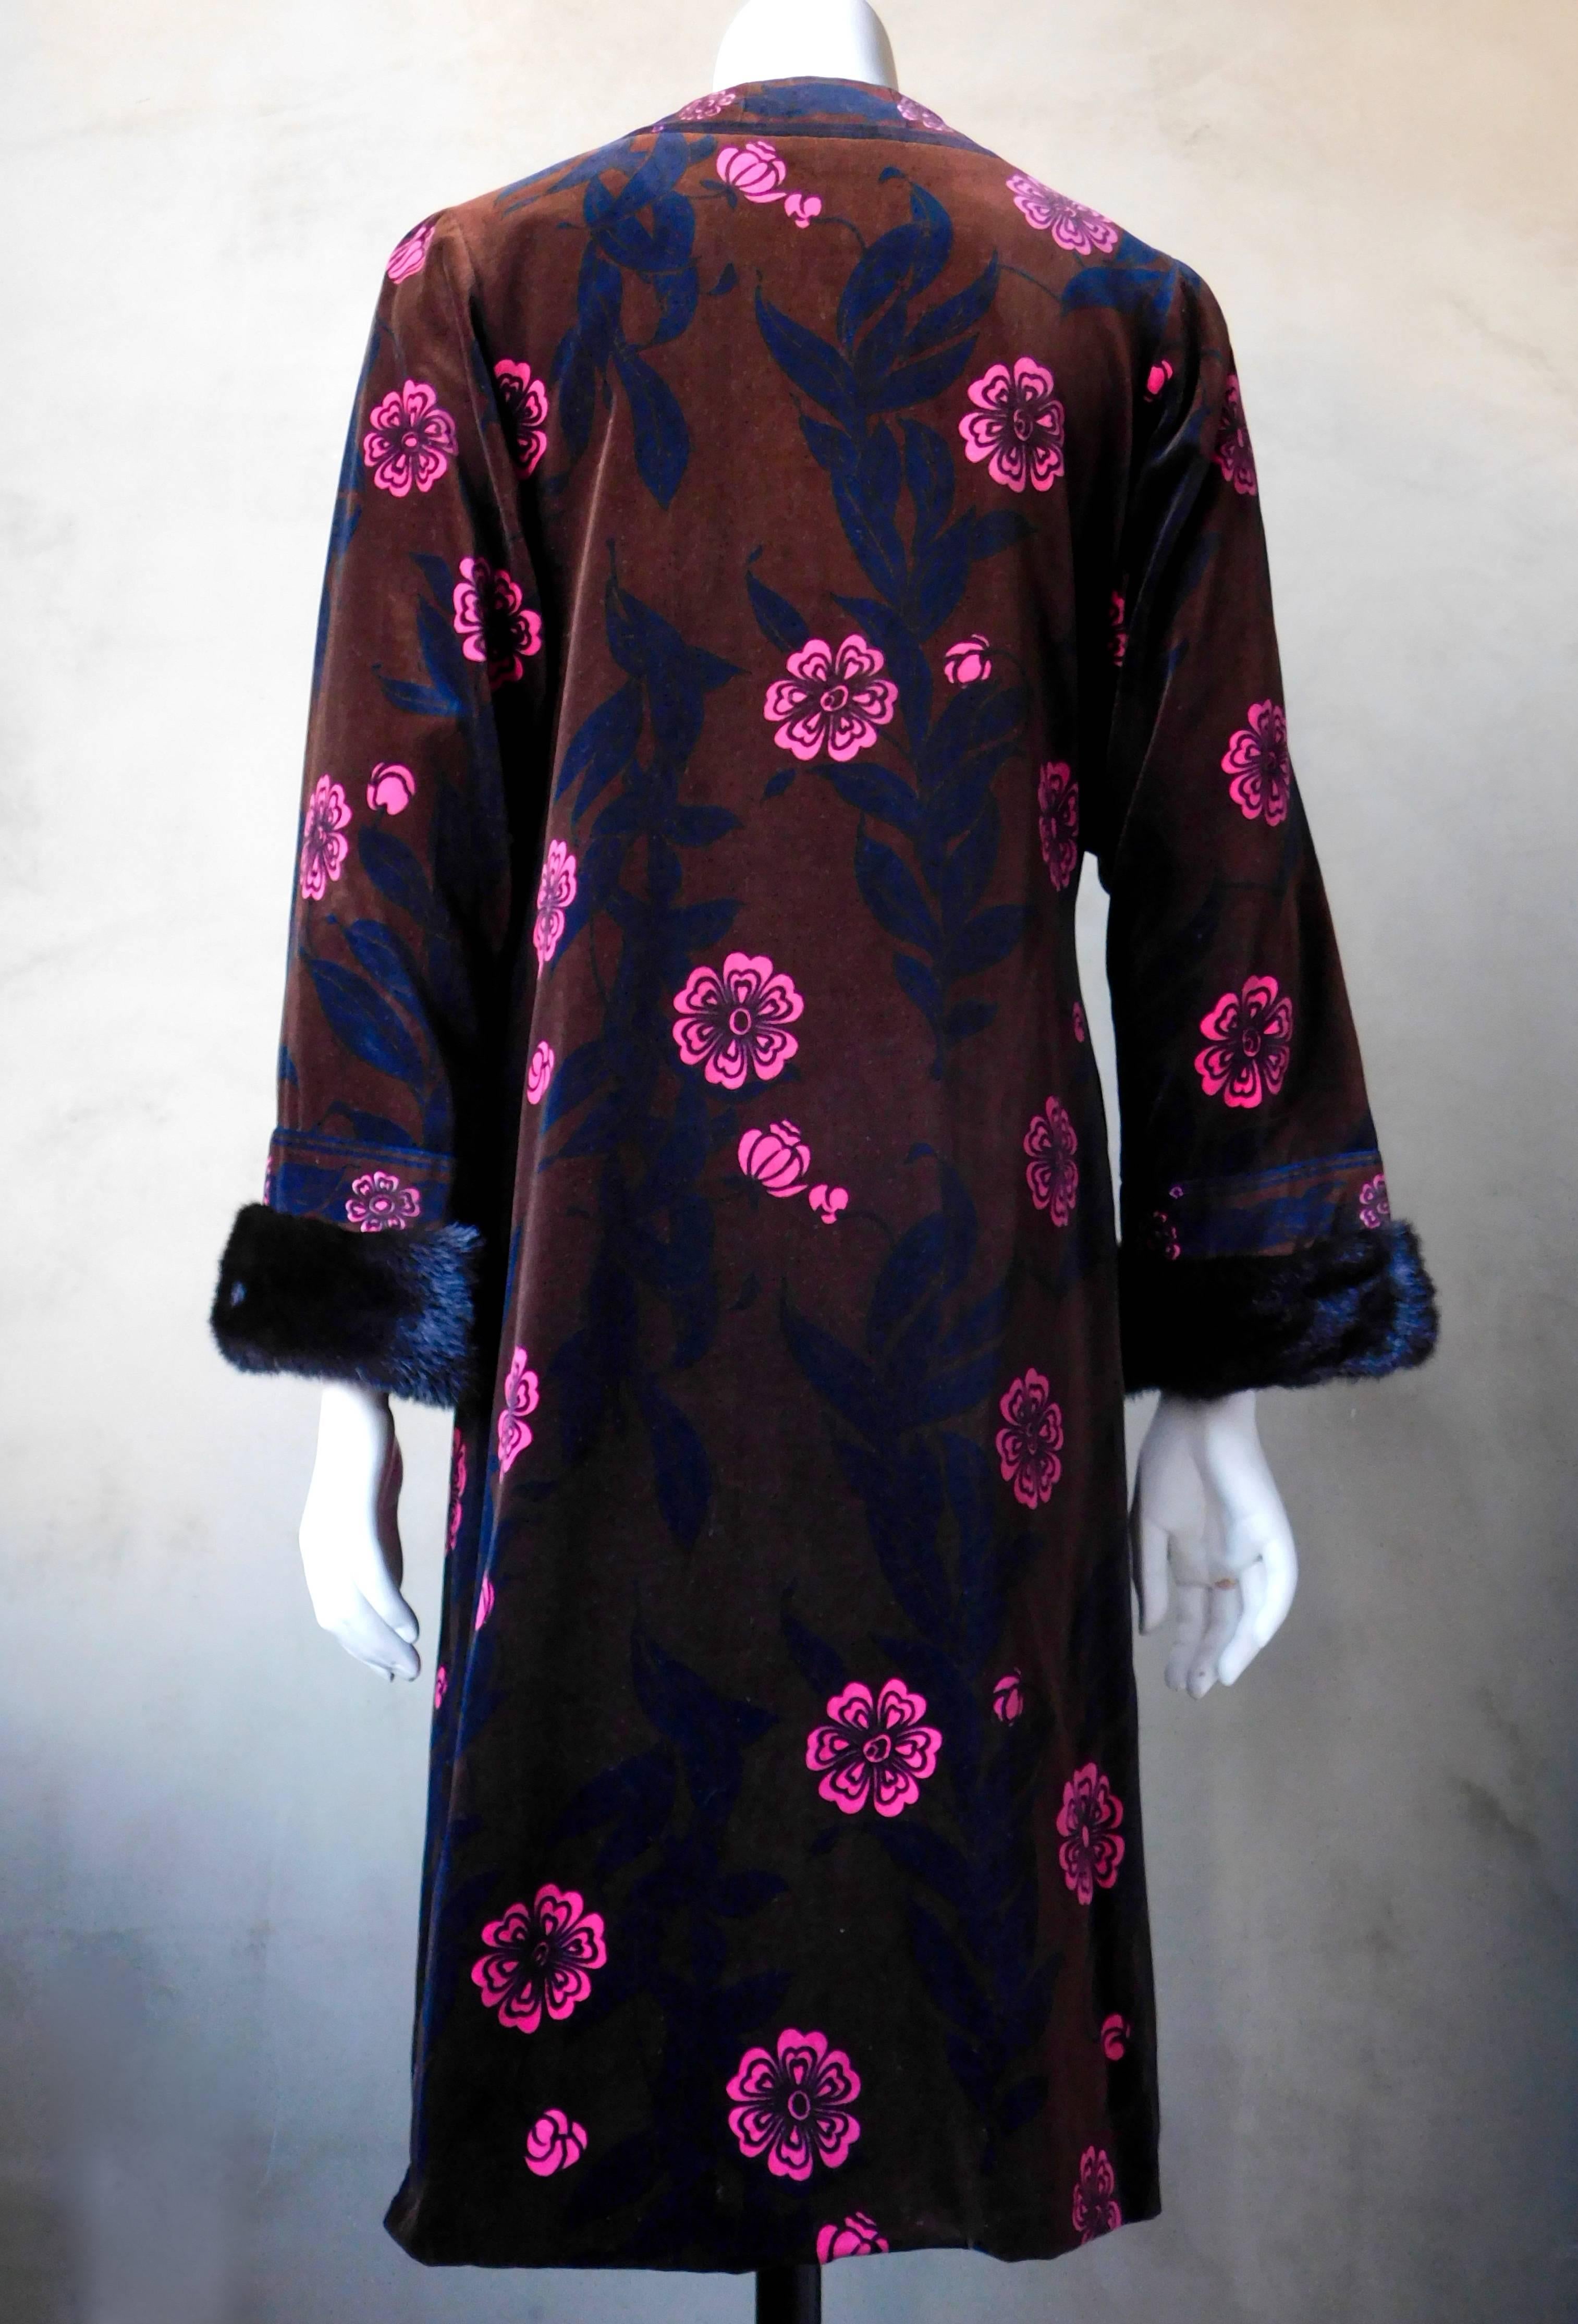 A very rare late 1960's Emilio Pucci printed velvet coat with mink cuffs. Chic climbing vine print in subdued black and brown with hot pink flowers.
The coat has side slits and covered buttons. 
In very good condition and ready to wear!
Fits size